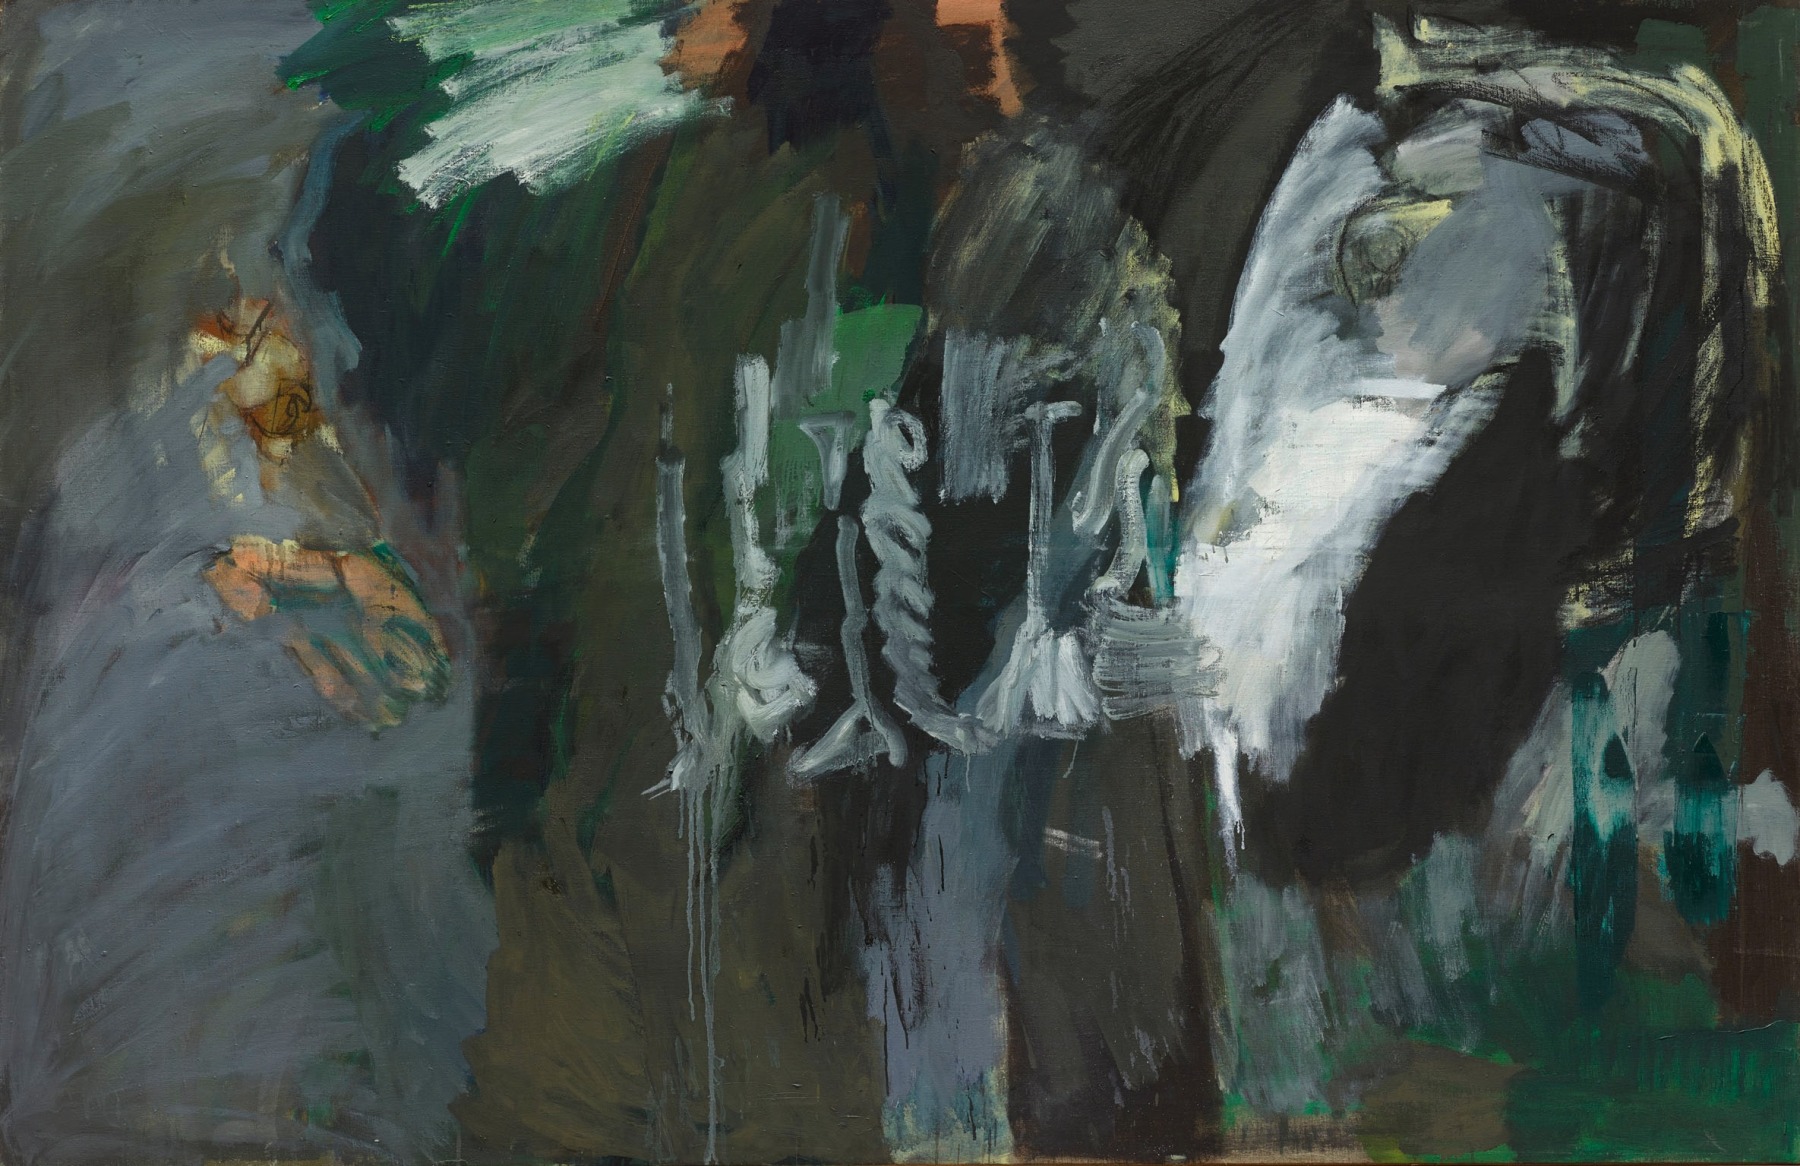 Per Kirkeby

&amp;ldquo;Untitled&amp;rdquo;, 1982

Oil on canvas

51 1/4 x 78 3/4 inches

130 x 200 cm

PK 140